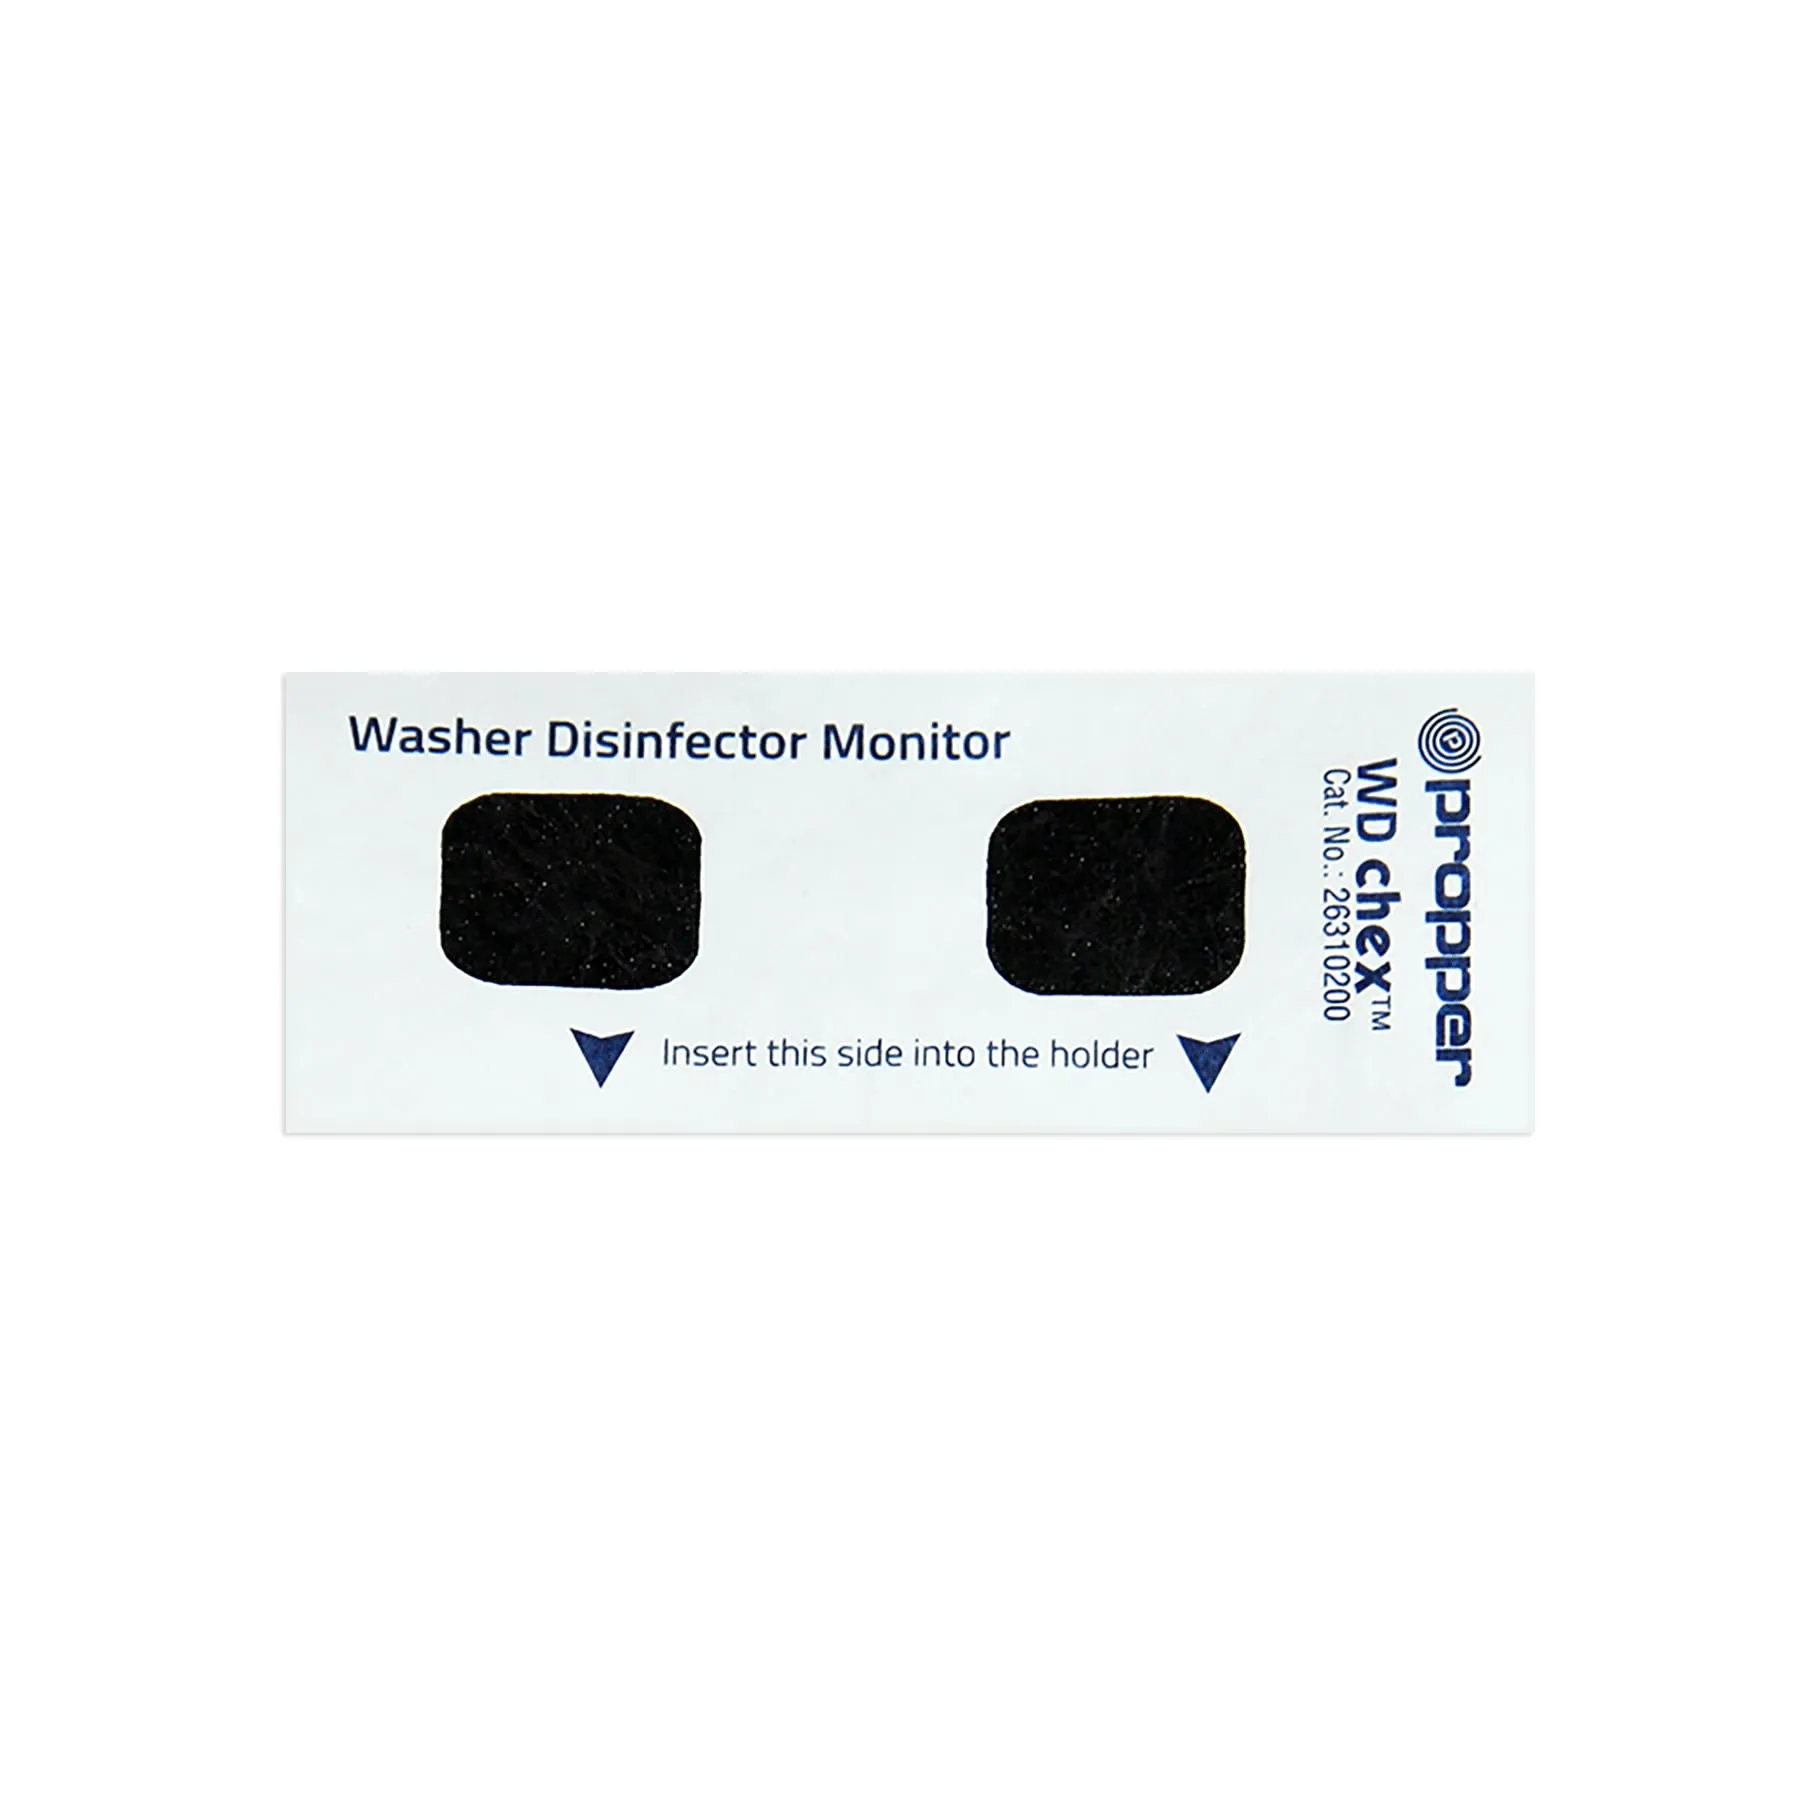 Propper Manufacturing - 26310200 - Propper Wd-chex Washer Disinfector Indicator